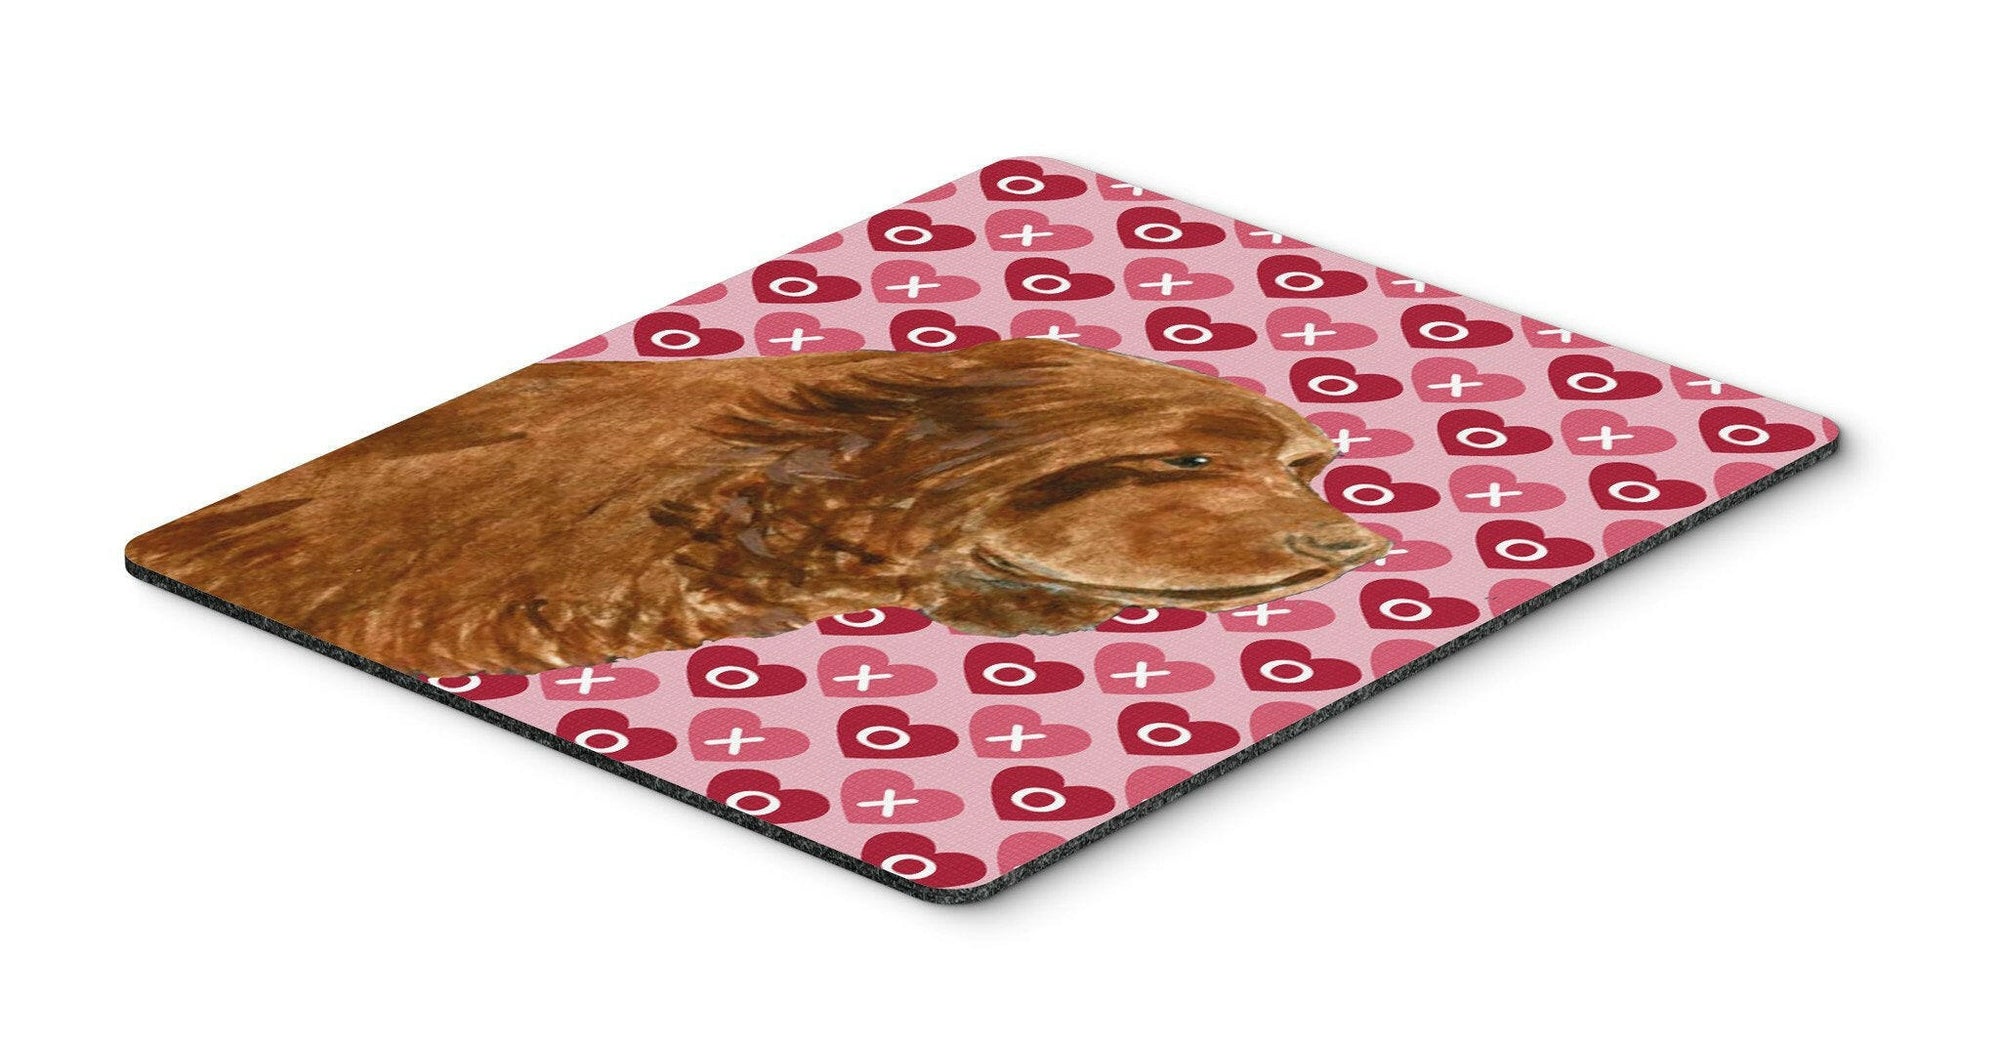 Sussex Spaniel Hearts Love and Valentine's Day Mouse Pad, Hot Pad or Trivet by Caroline's Treasures